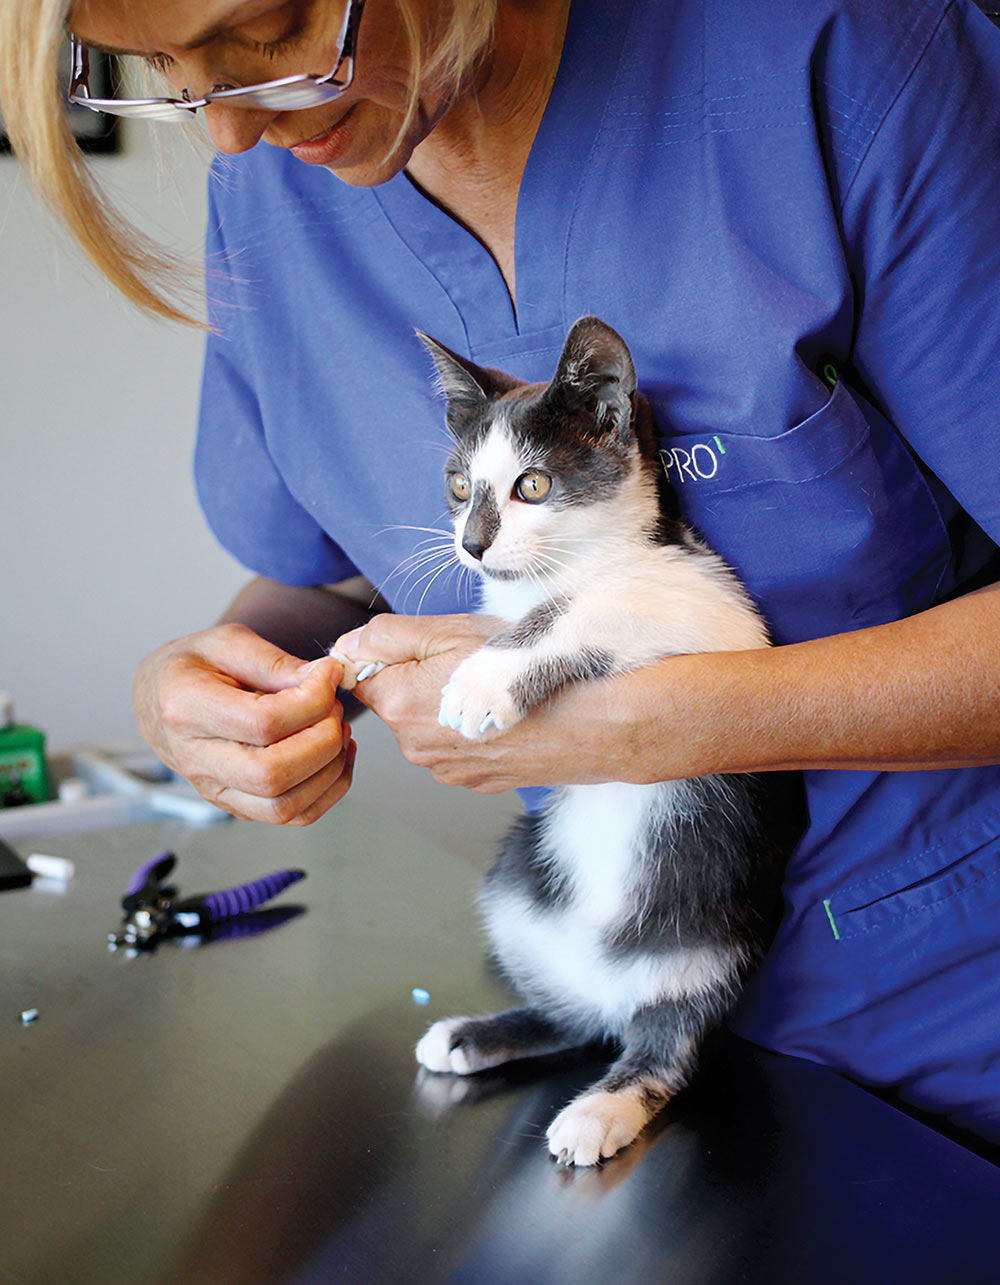 Debra Norton wears scrubs and gently grasps a black and white domestic short-haired cat while trimming its claws at a grooming table